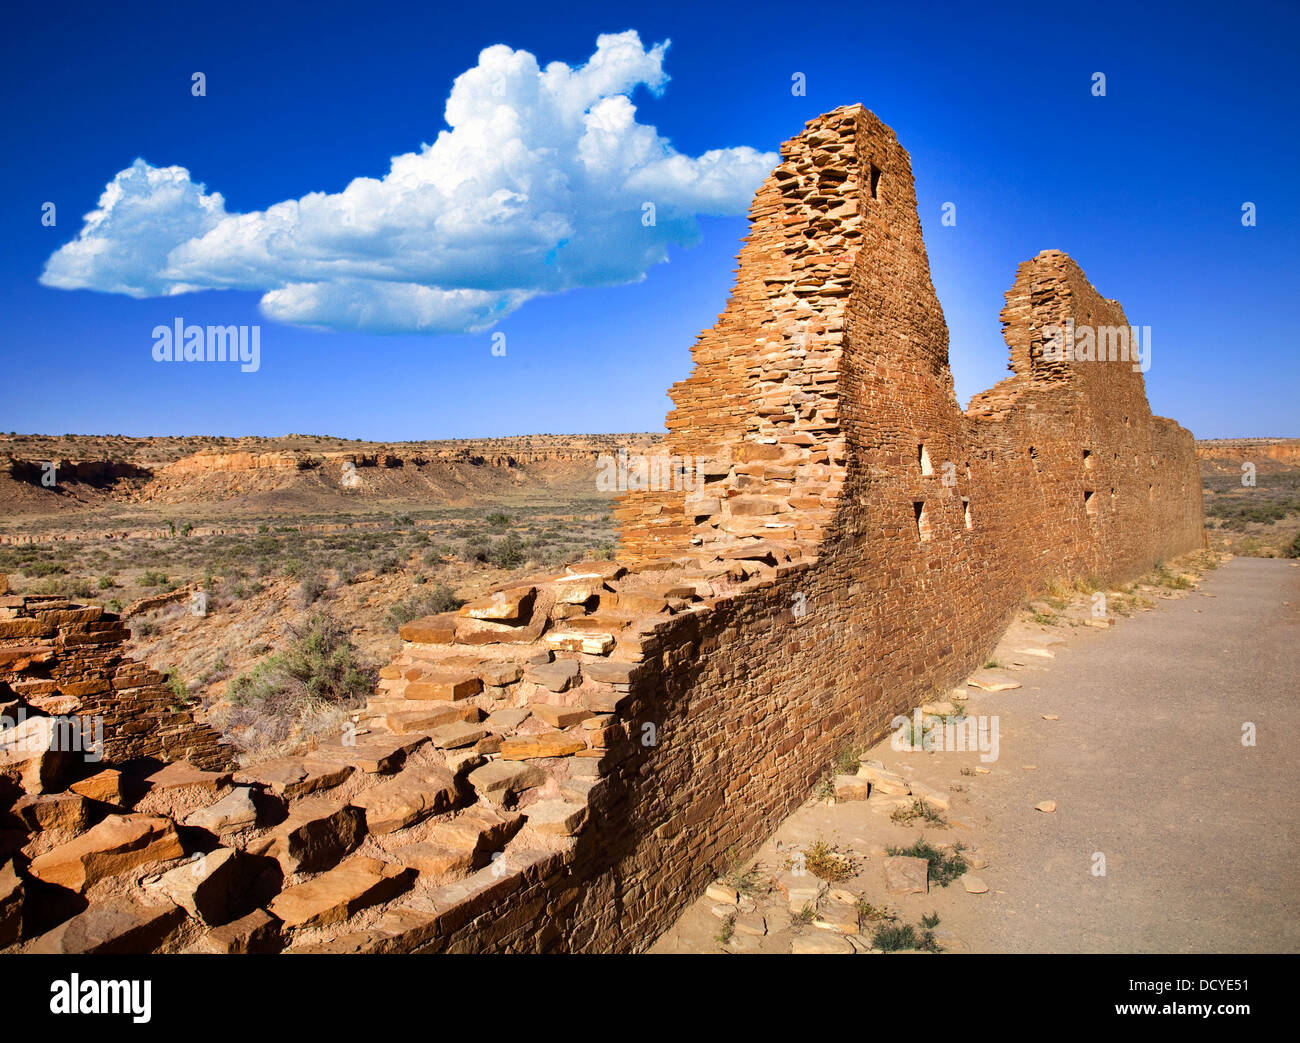 The sandstone walls of the Anasazi great house of Hungo Pavi, Chaco Canyon National Historical Park, New Mexico Stock Photo